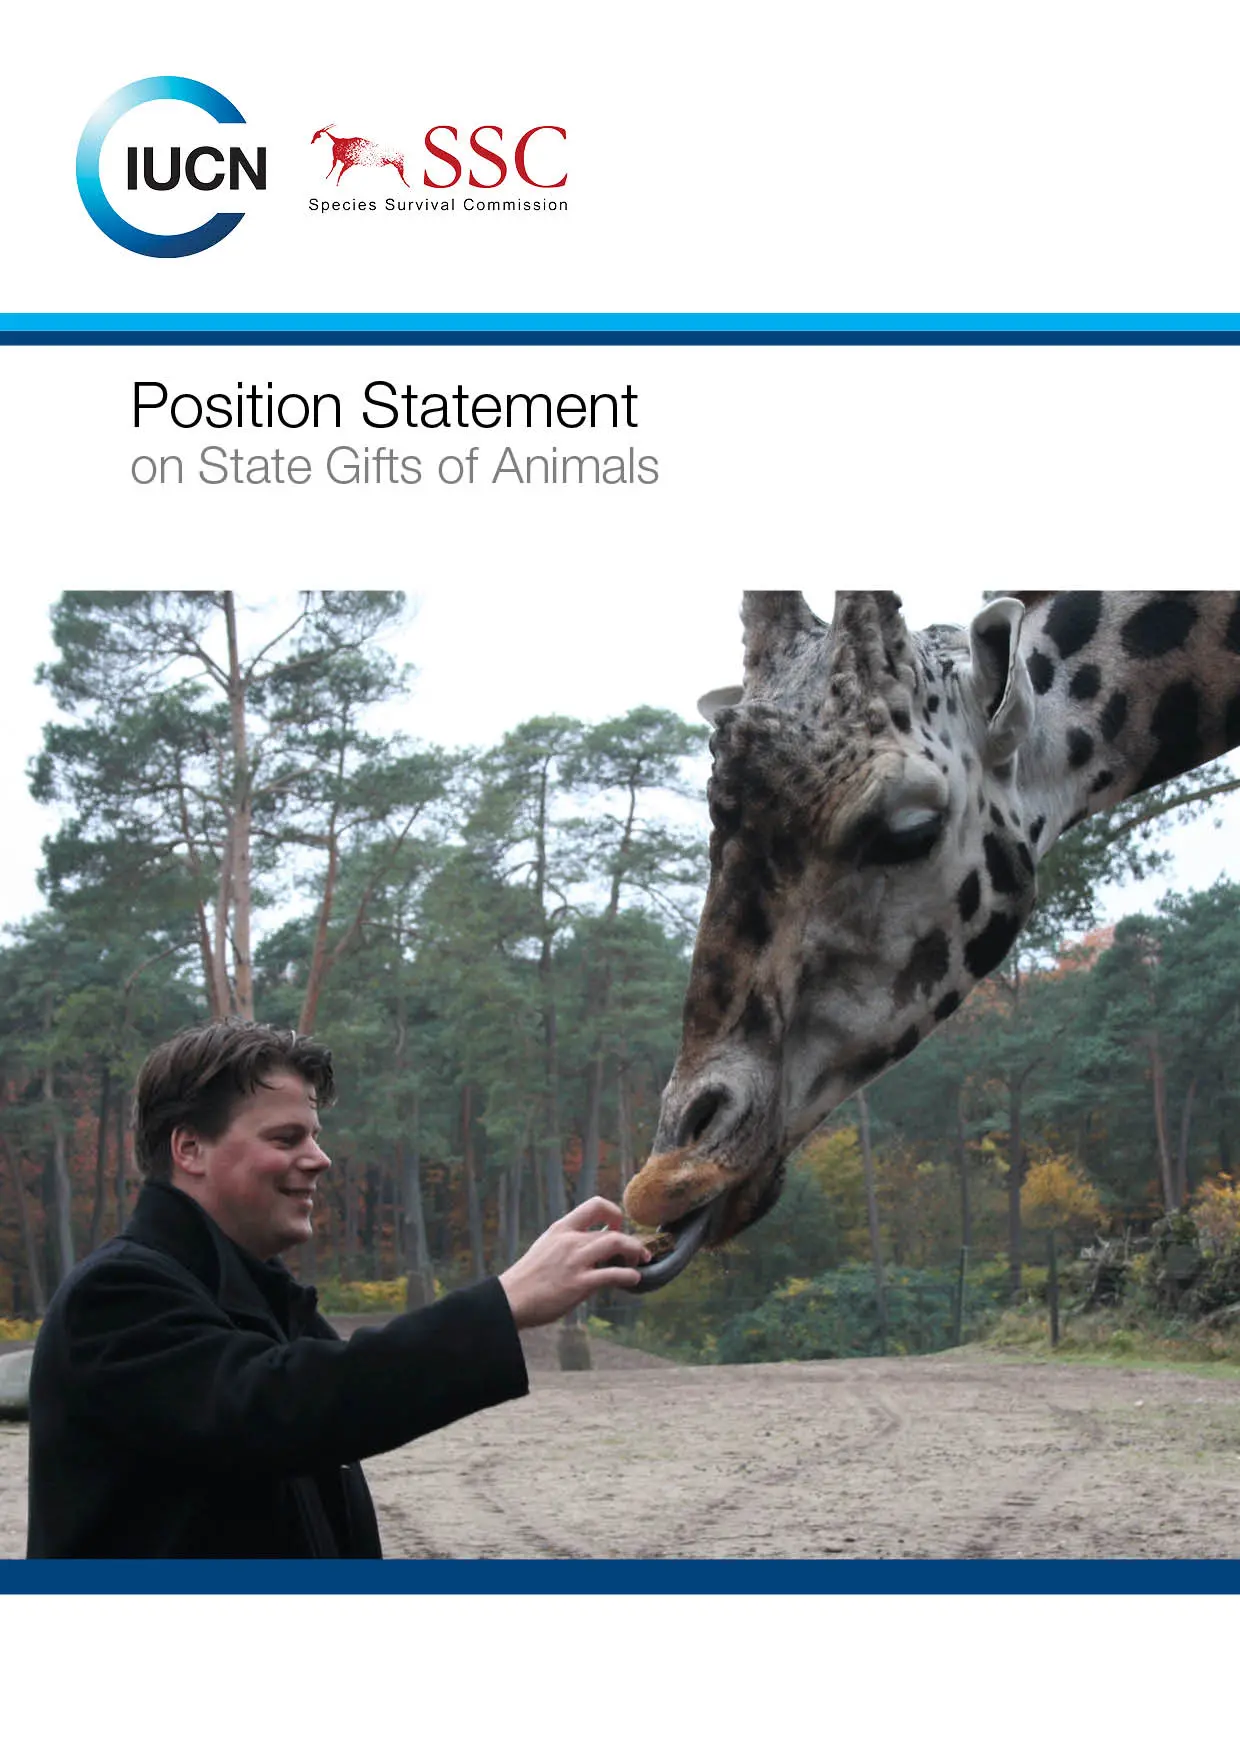 IUCN Commission Statement on State Gifts of Animals